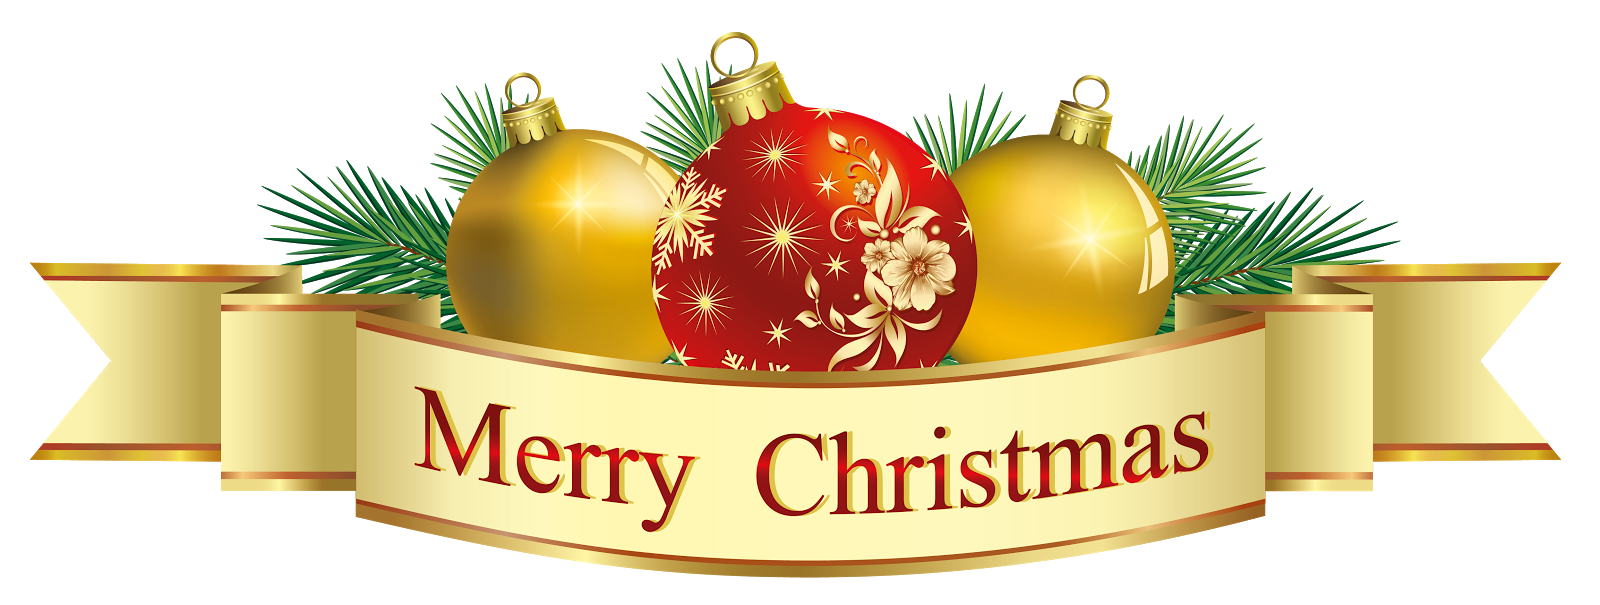 Christmas clipart latest 2016 - Merry Christmas Clipart Images